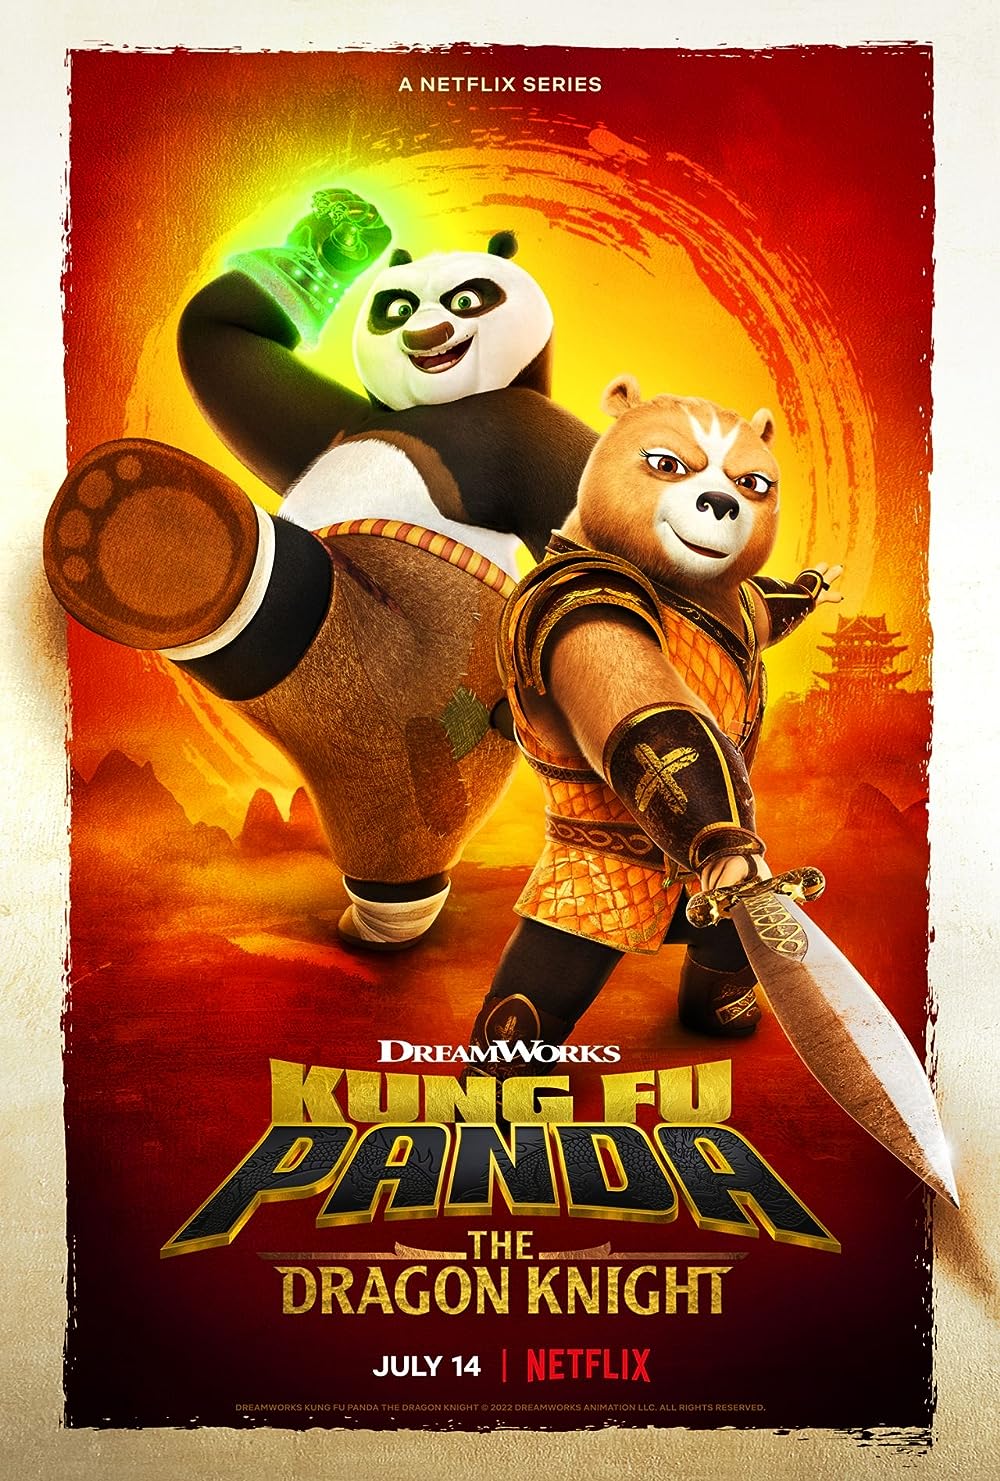 Kung Fu Panda: The Dragon Knight Season 3 (September 7 - Netflix)Join Po and his companions in the latest adventures of 